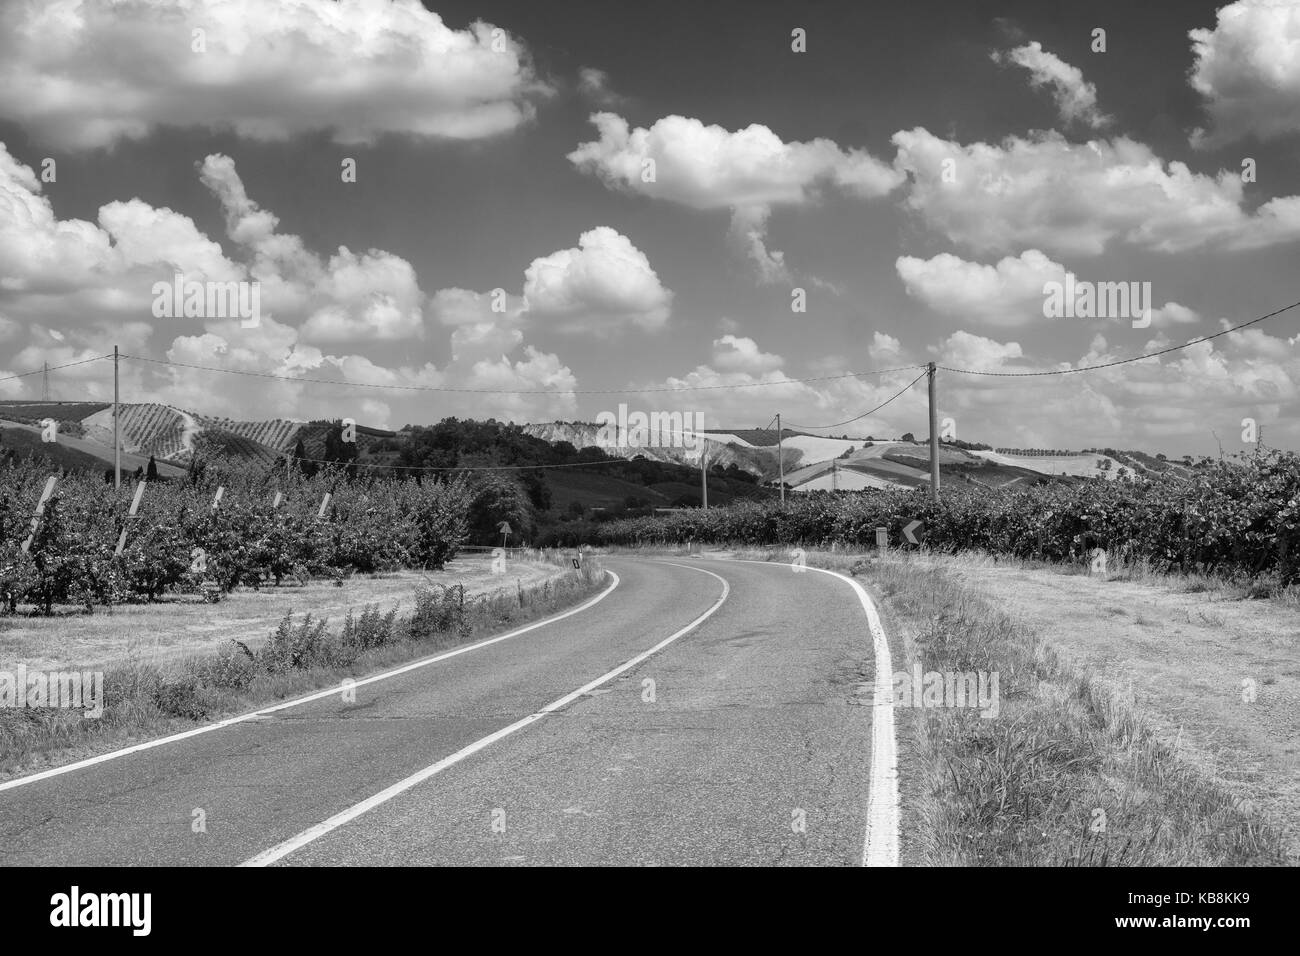 Rural landscape at summer between Modigliana and Faenza (Forli Cesena, Romagna, Italy). Black and white Stock Photo